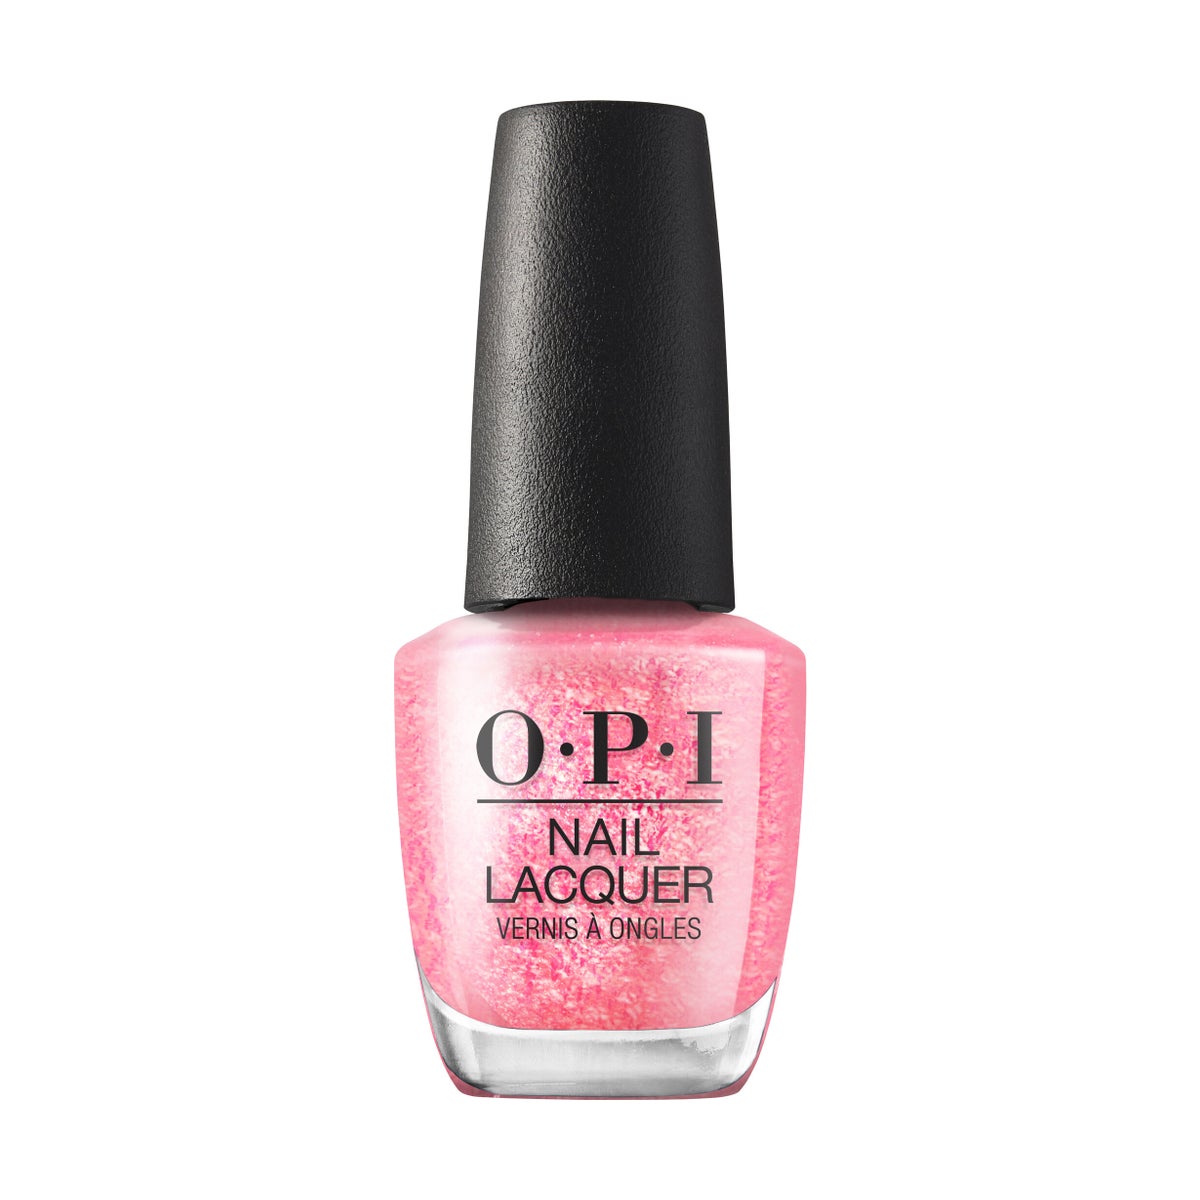 Pixel Dust - OPI Nail Lacquer